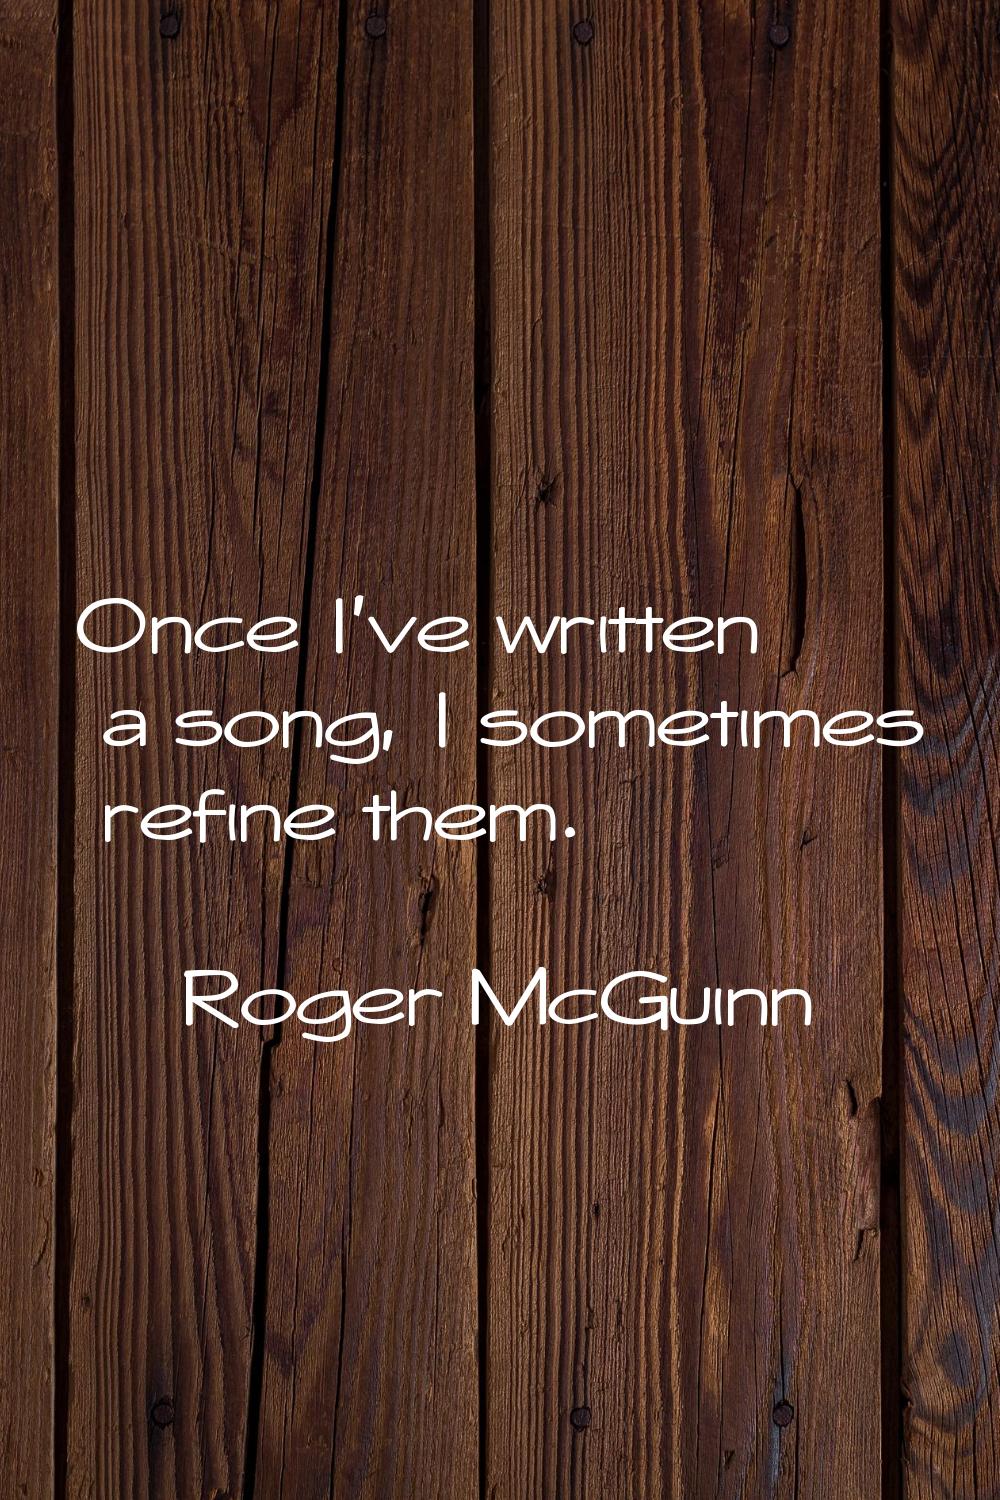 Once I've written a song, I sometimes refine them.